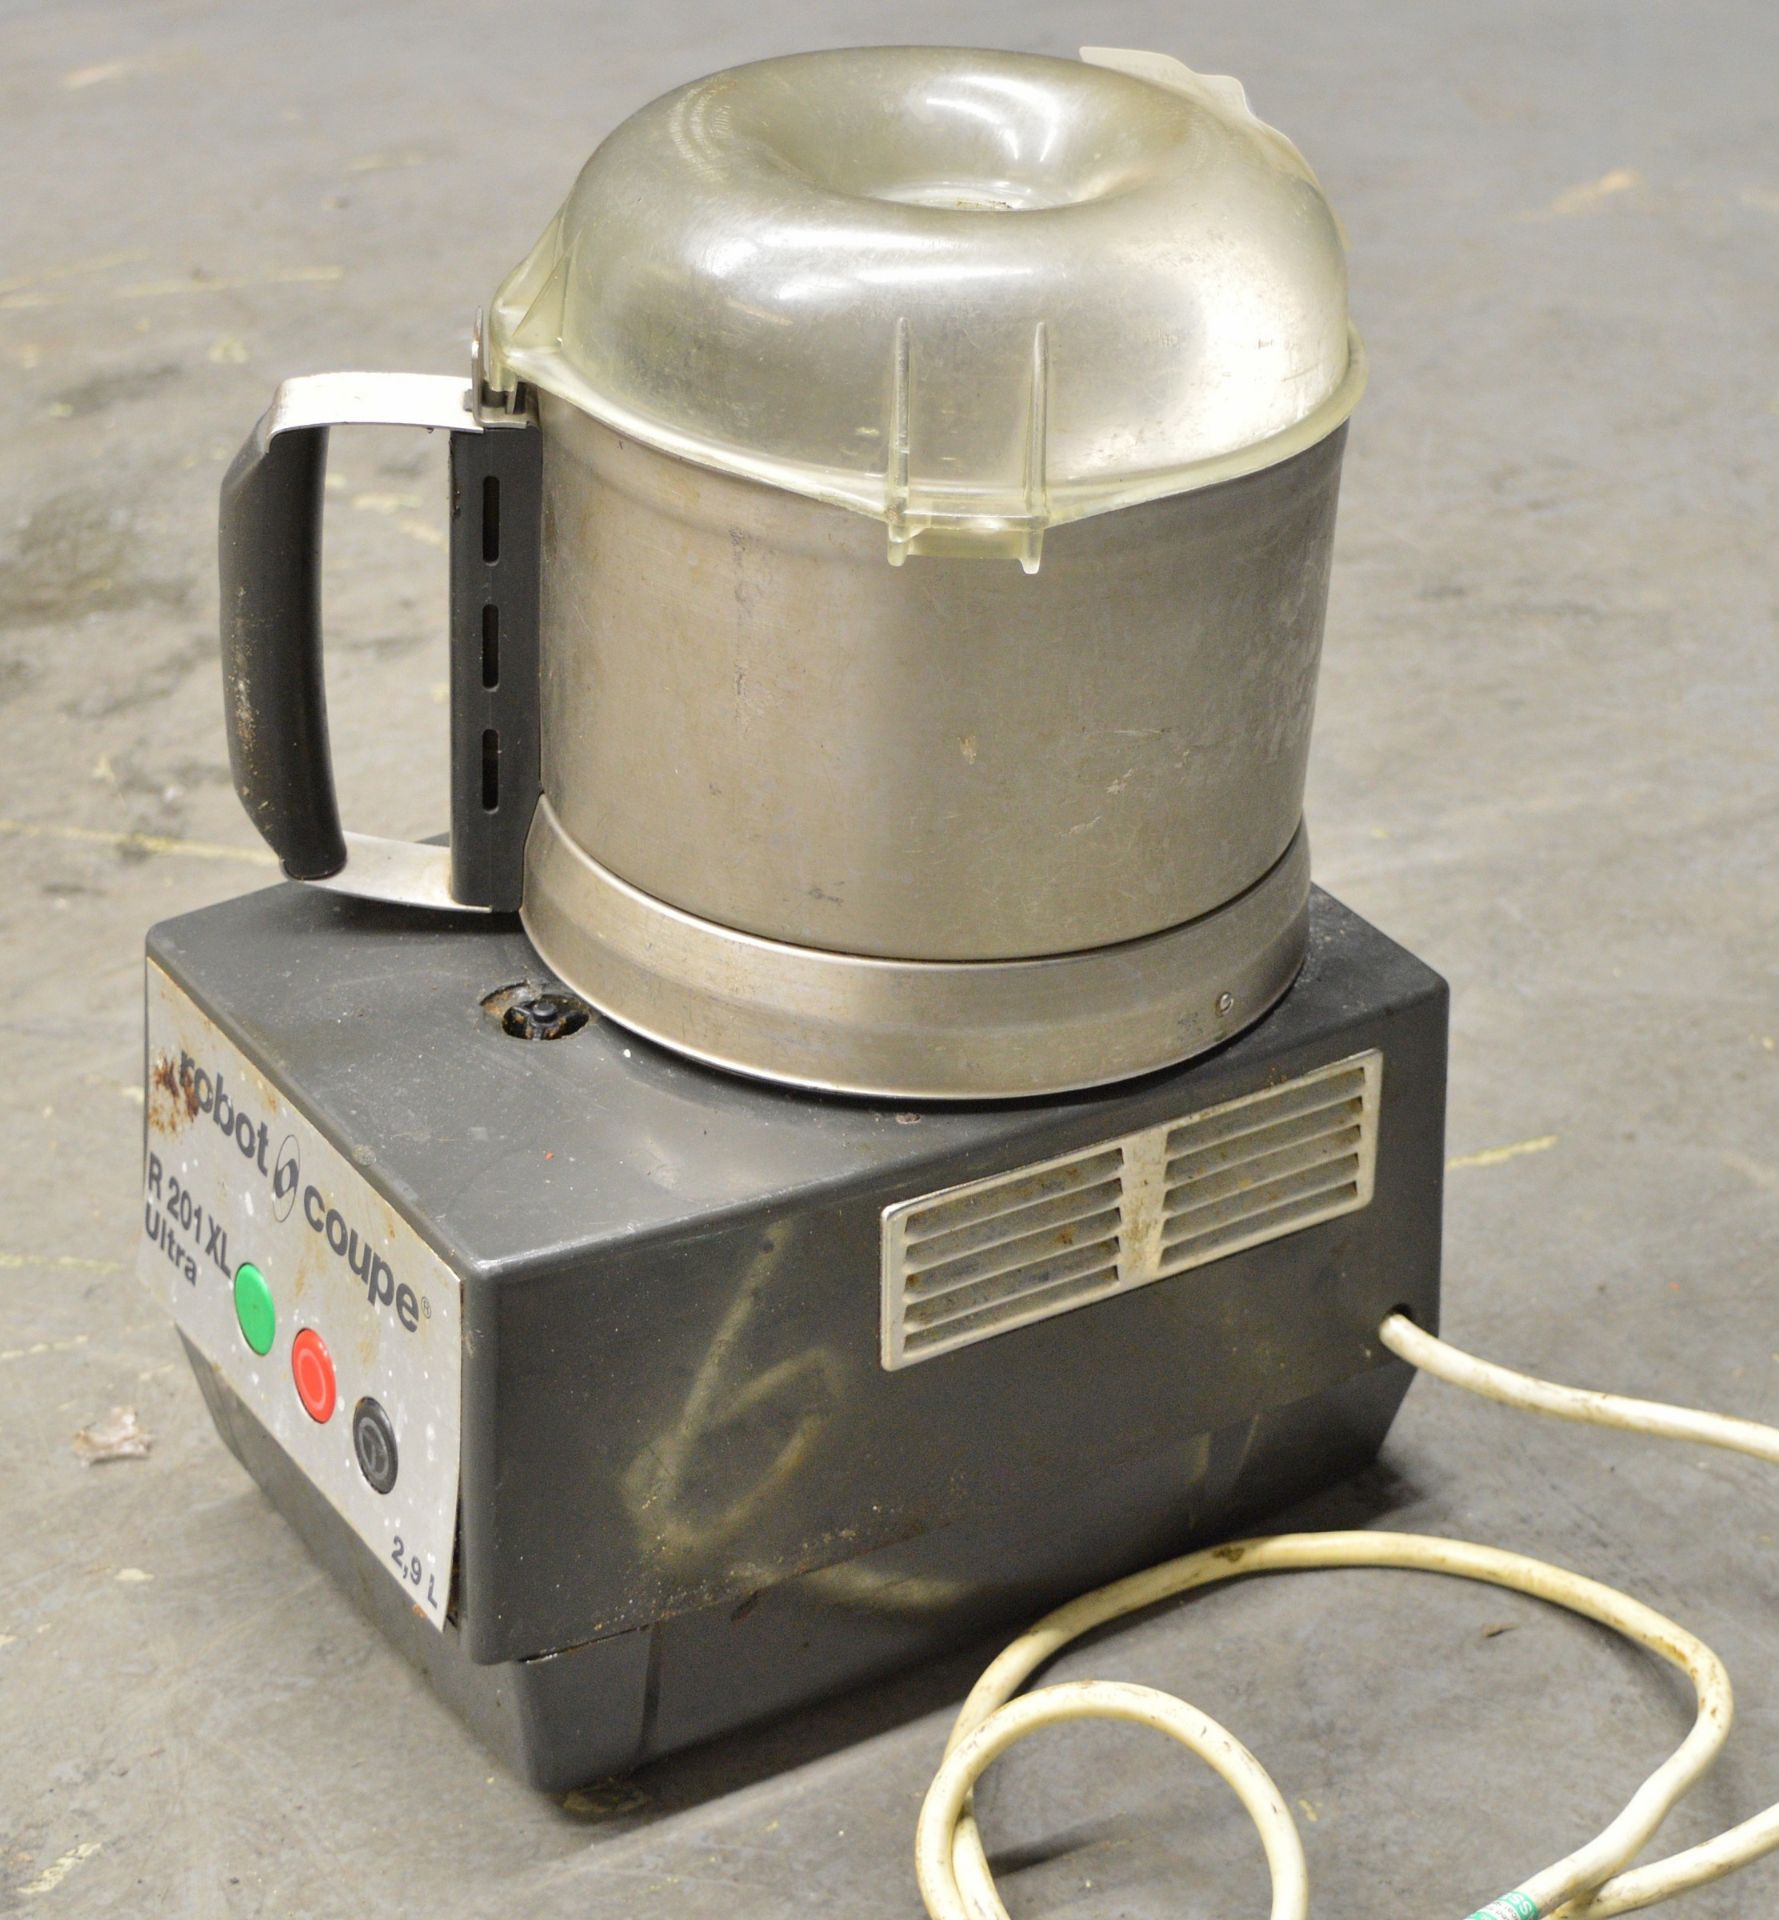 Robot Coupe R 201 XL Ultra Food Processor (as spares) - Image 3 of 5